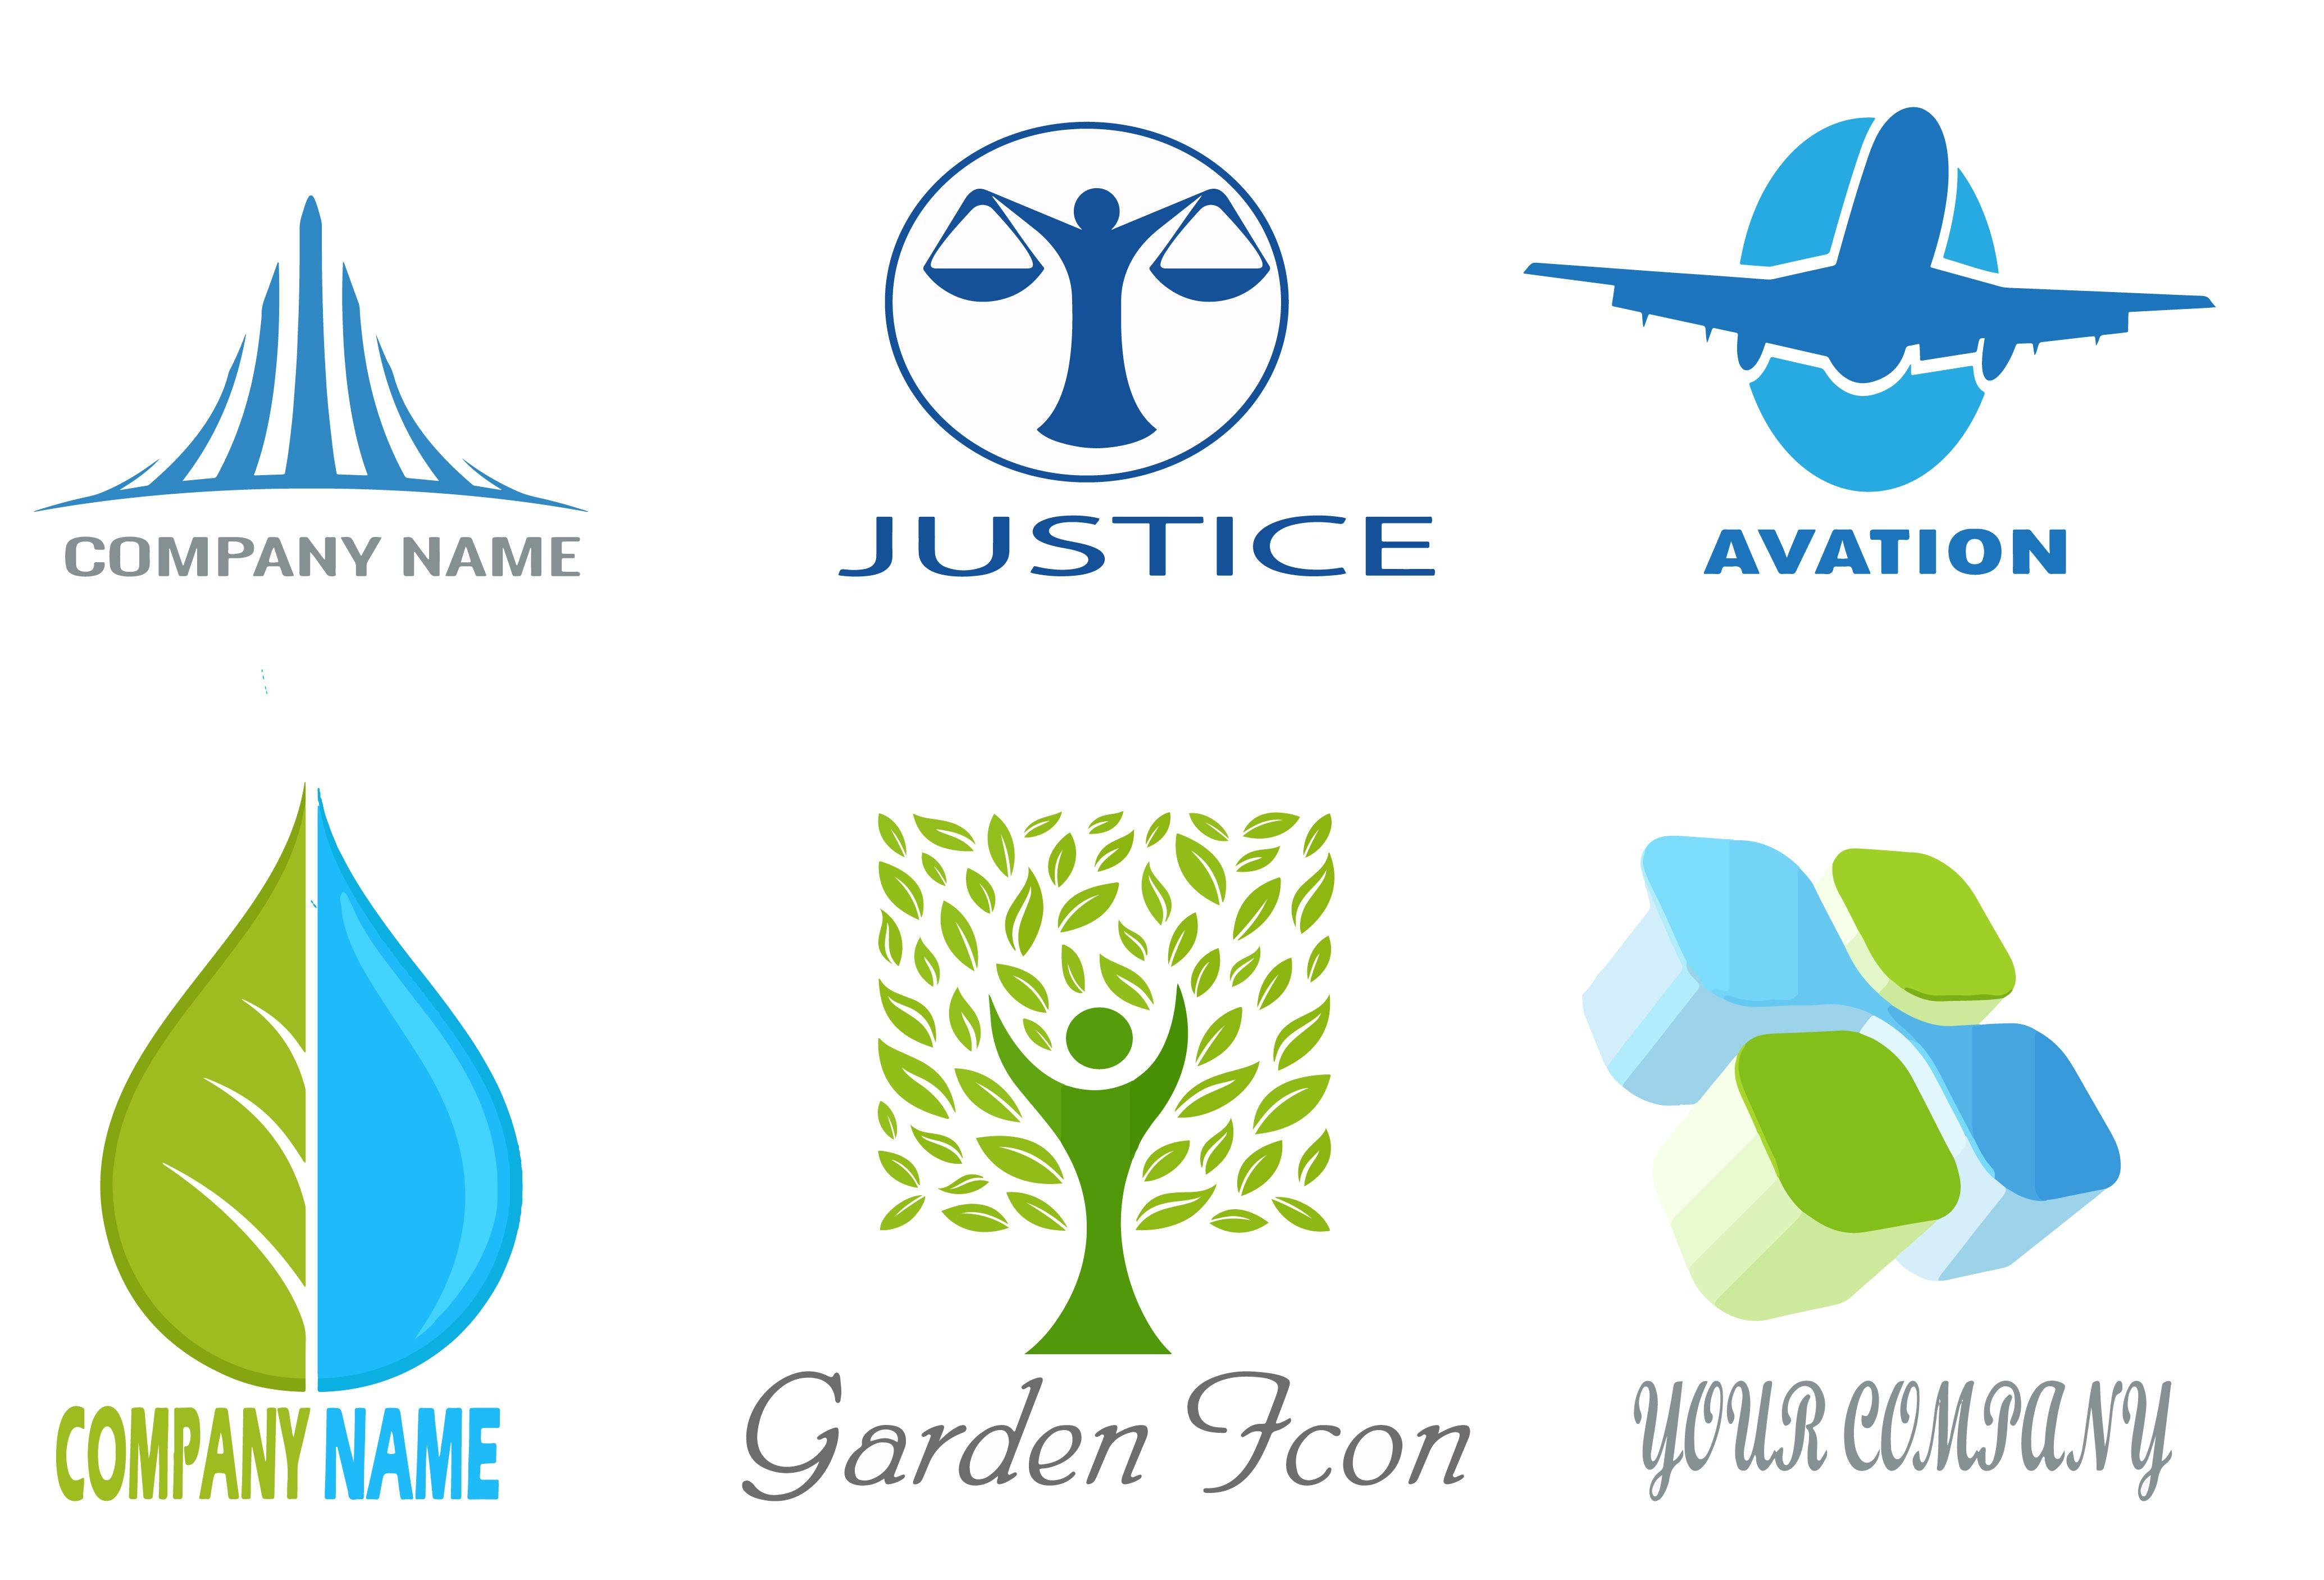 I'll Logo - I ll design 3 AWESOME and Professional logo design for your business